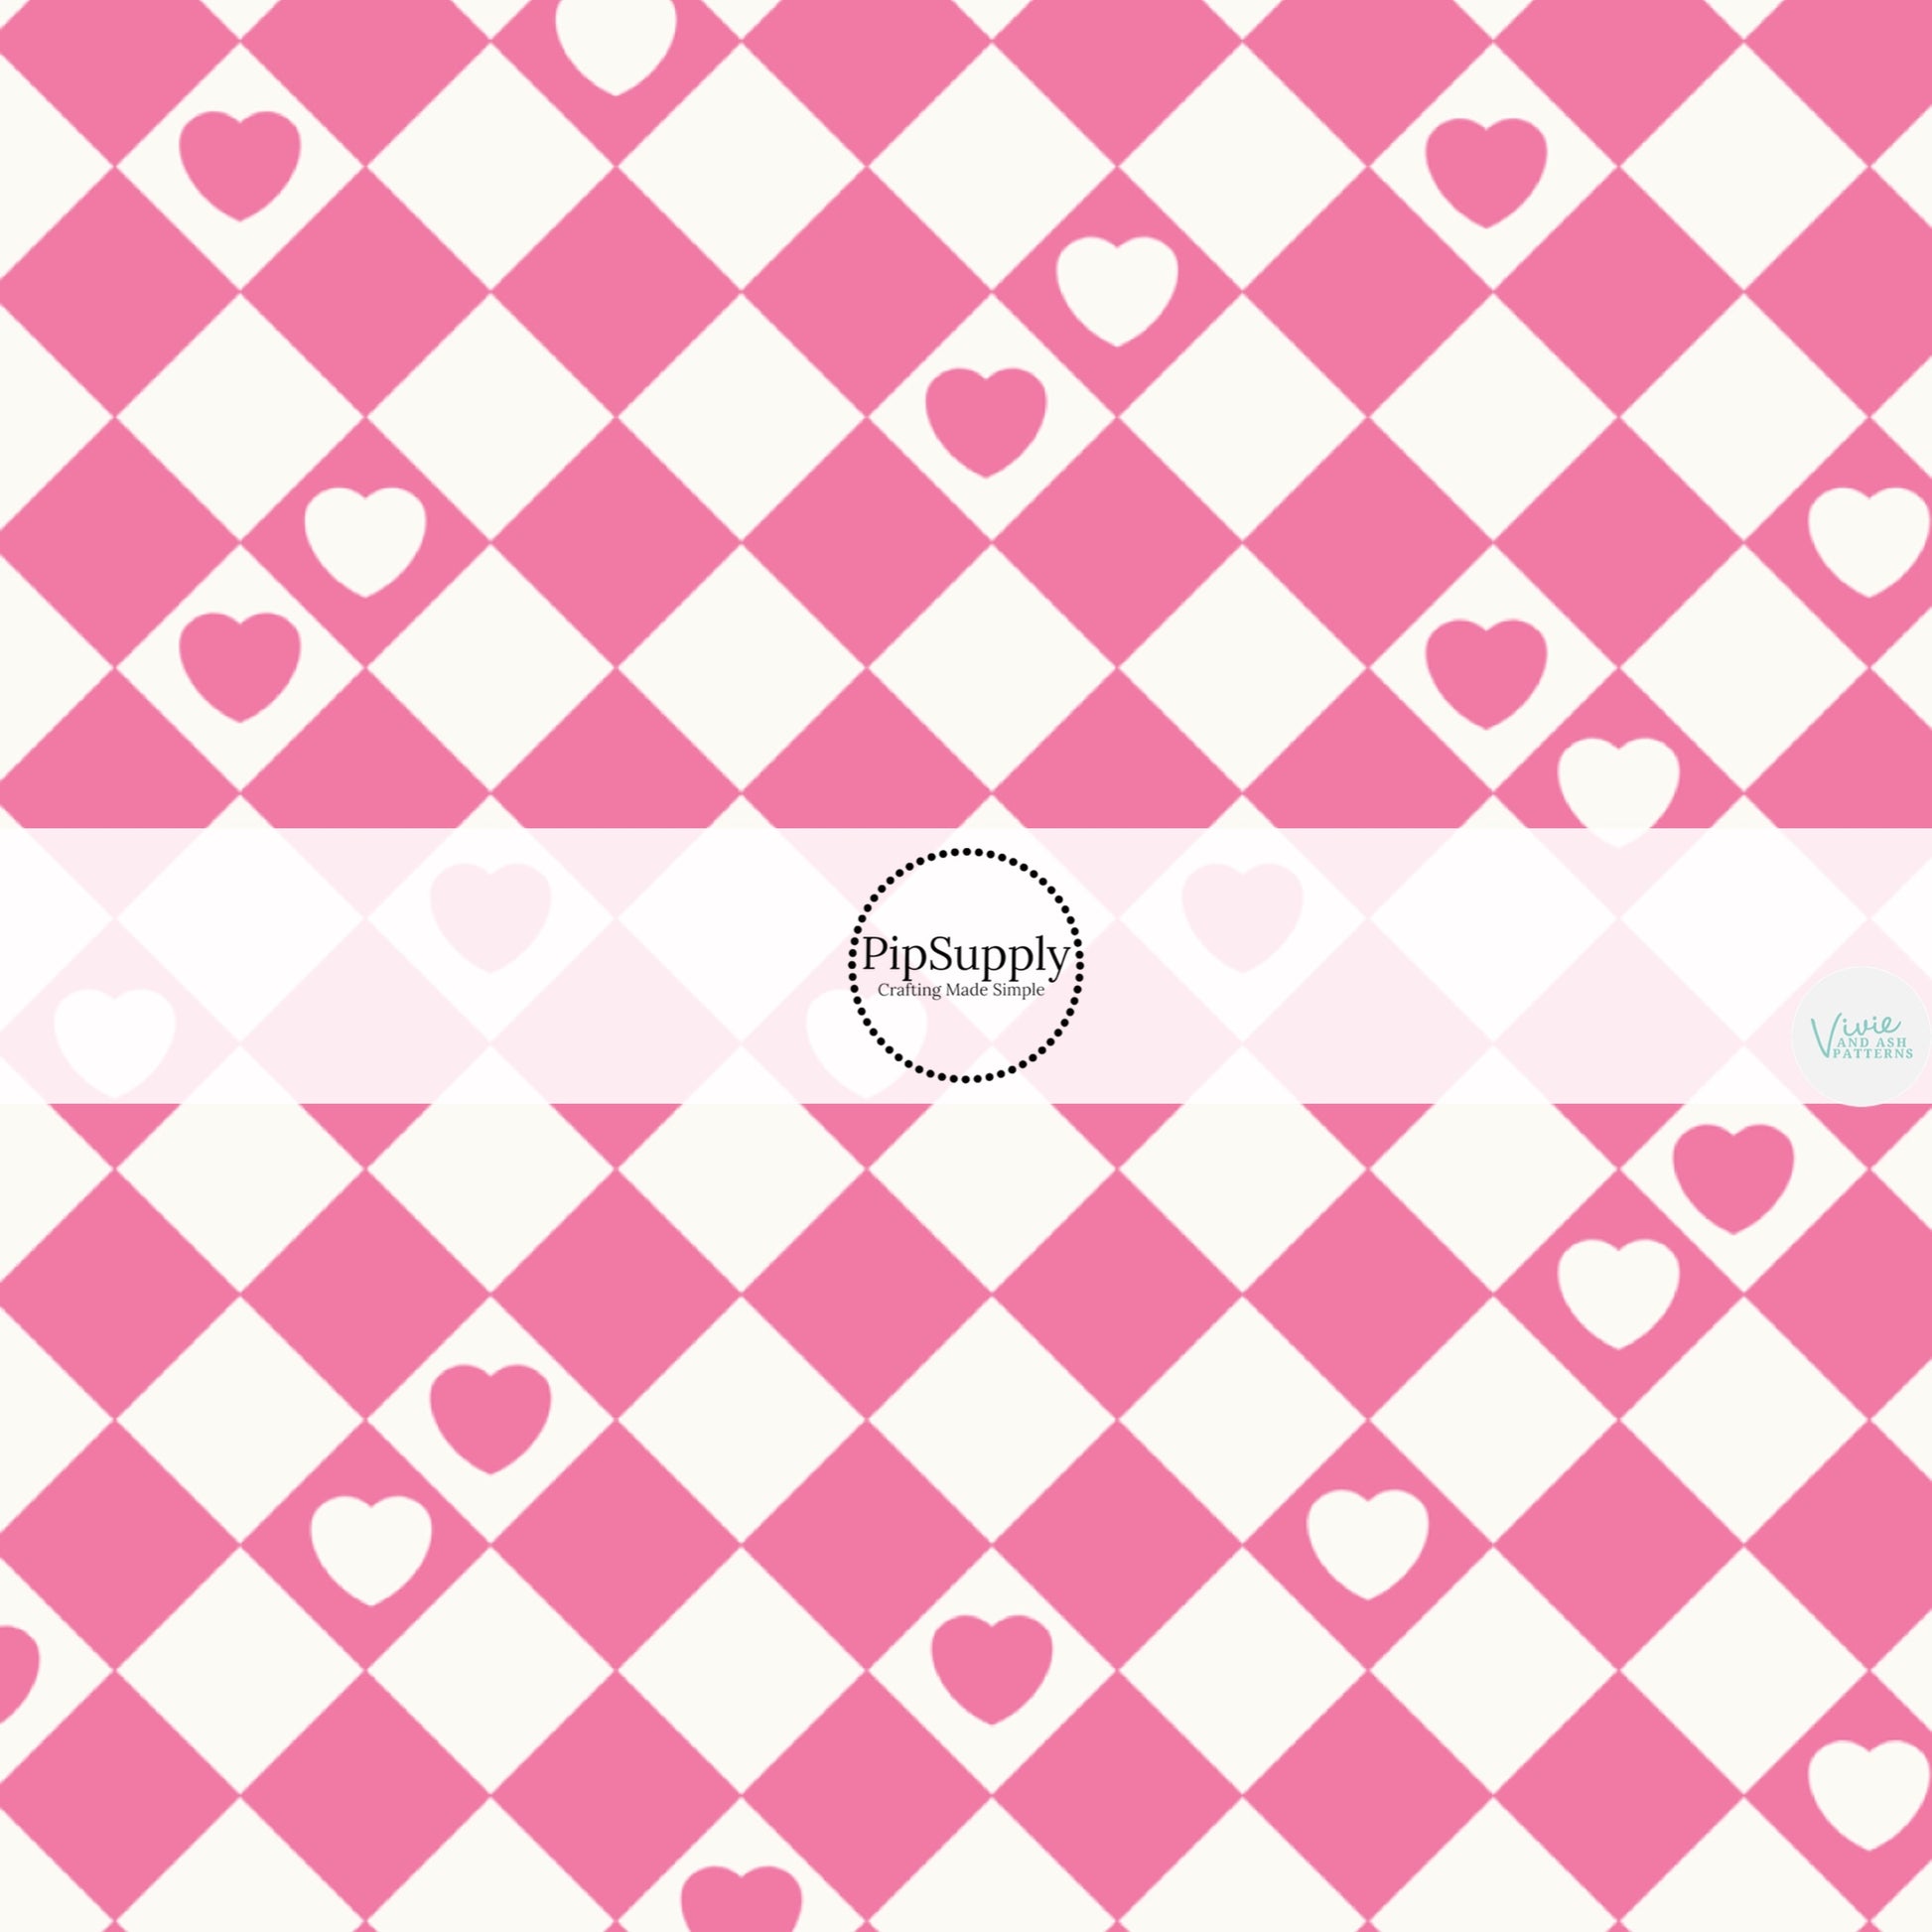 Hearts on Pink and White Checkered Print Fabric by the Yard